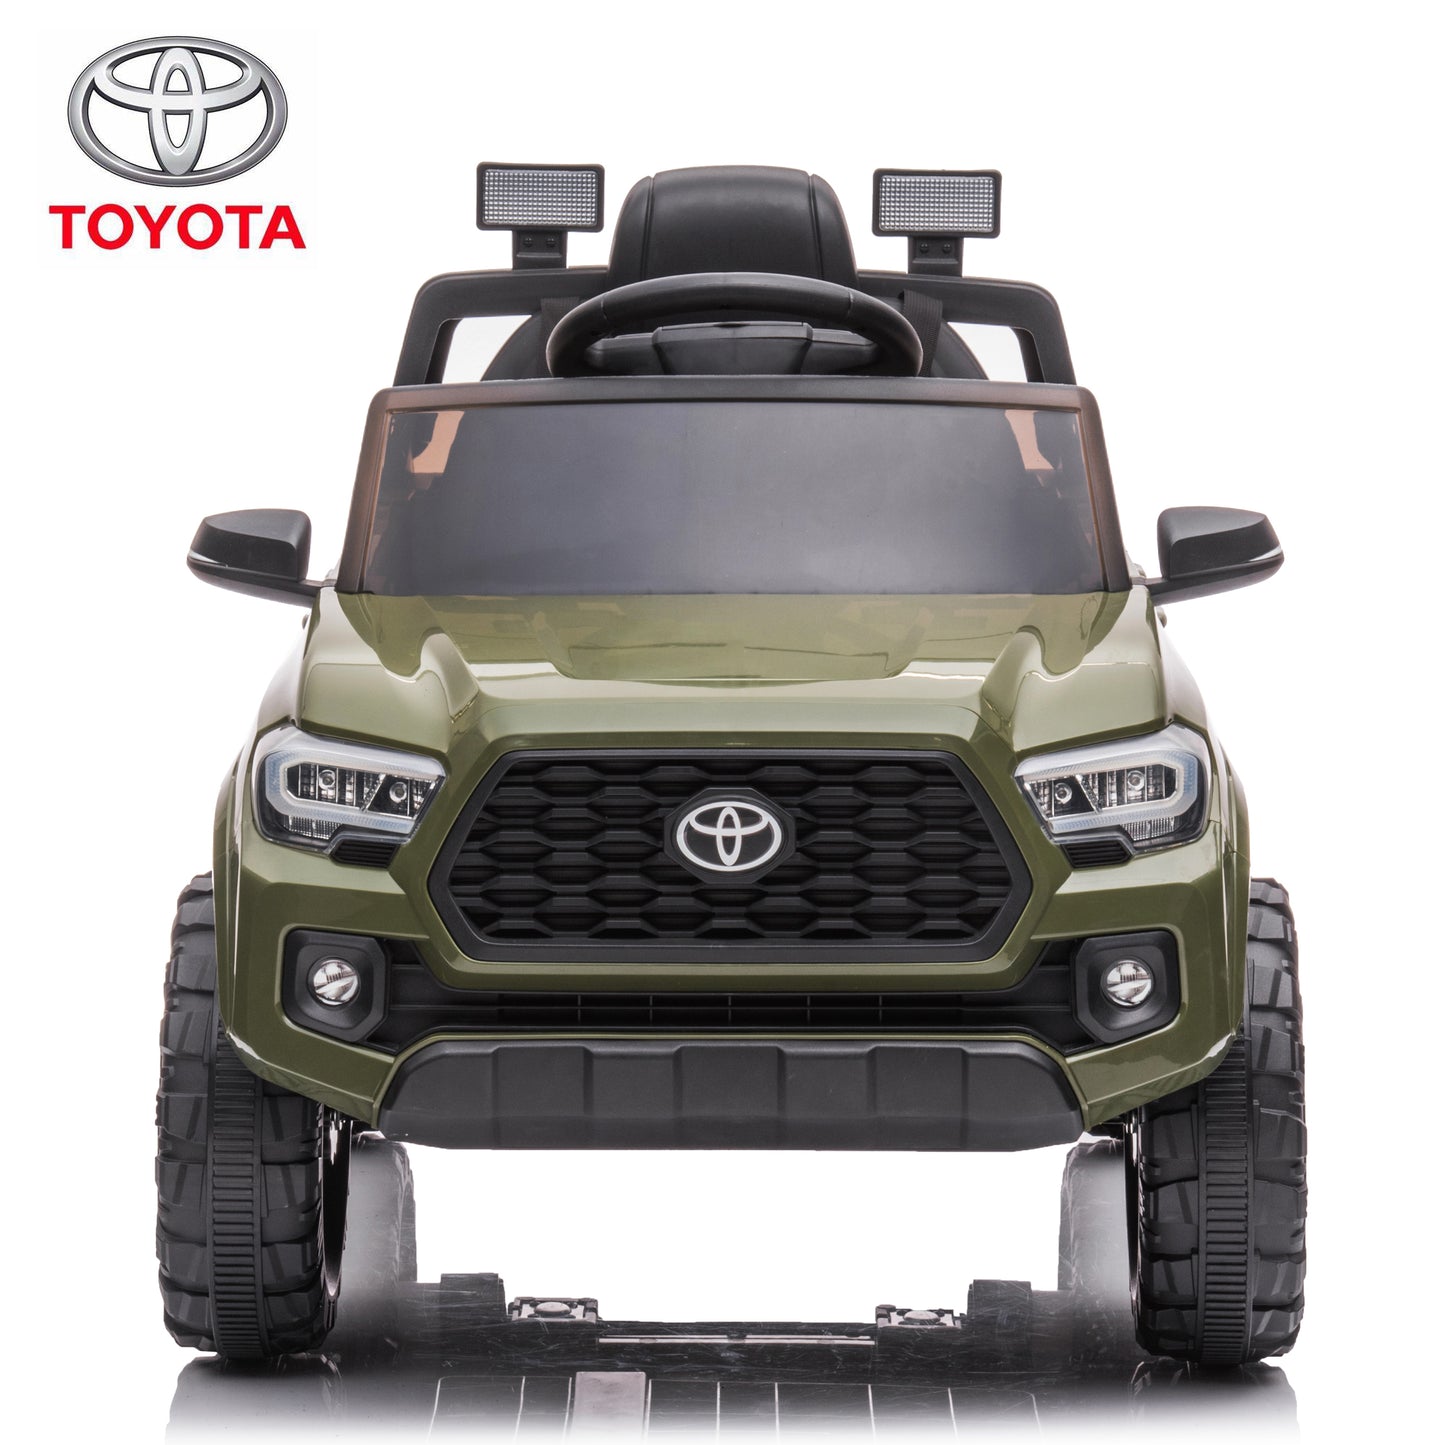 Licensed Toyota Tacoma Ride on Car for Kids, 12V Powered Ride on Toy with Remote Control, Electric Car Vehicle with LED Lights, MP3 Player, Battery Powered Toy Car for Boys/Girls, Green, Y019